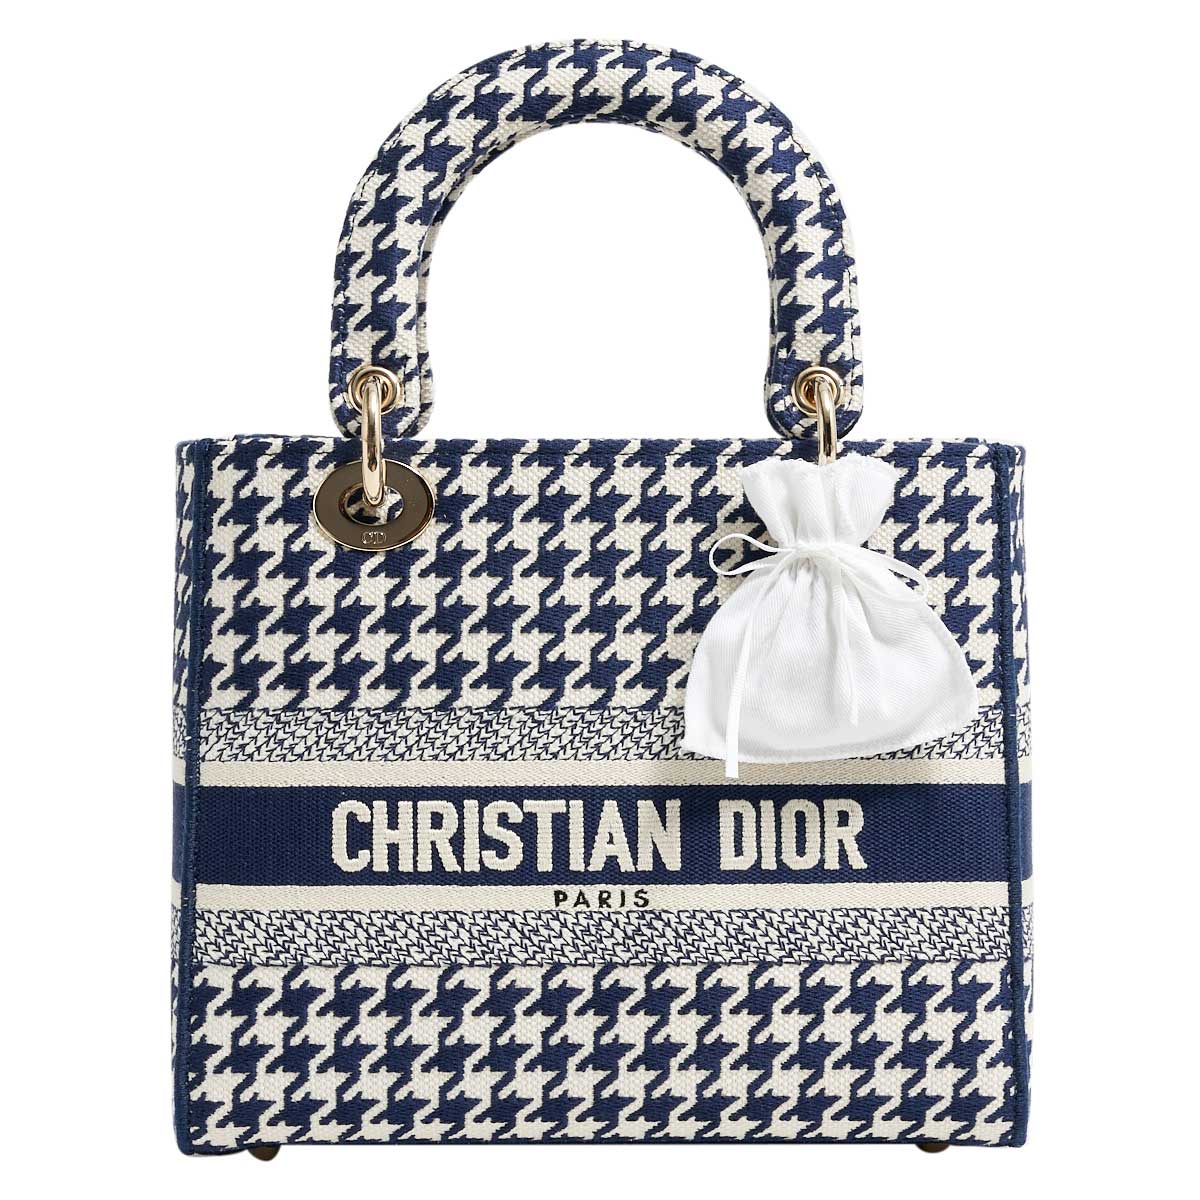 The Classic Canvas Lady Dior Bag Is Back